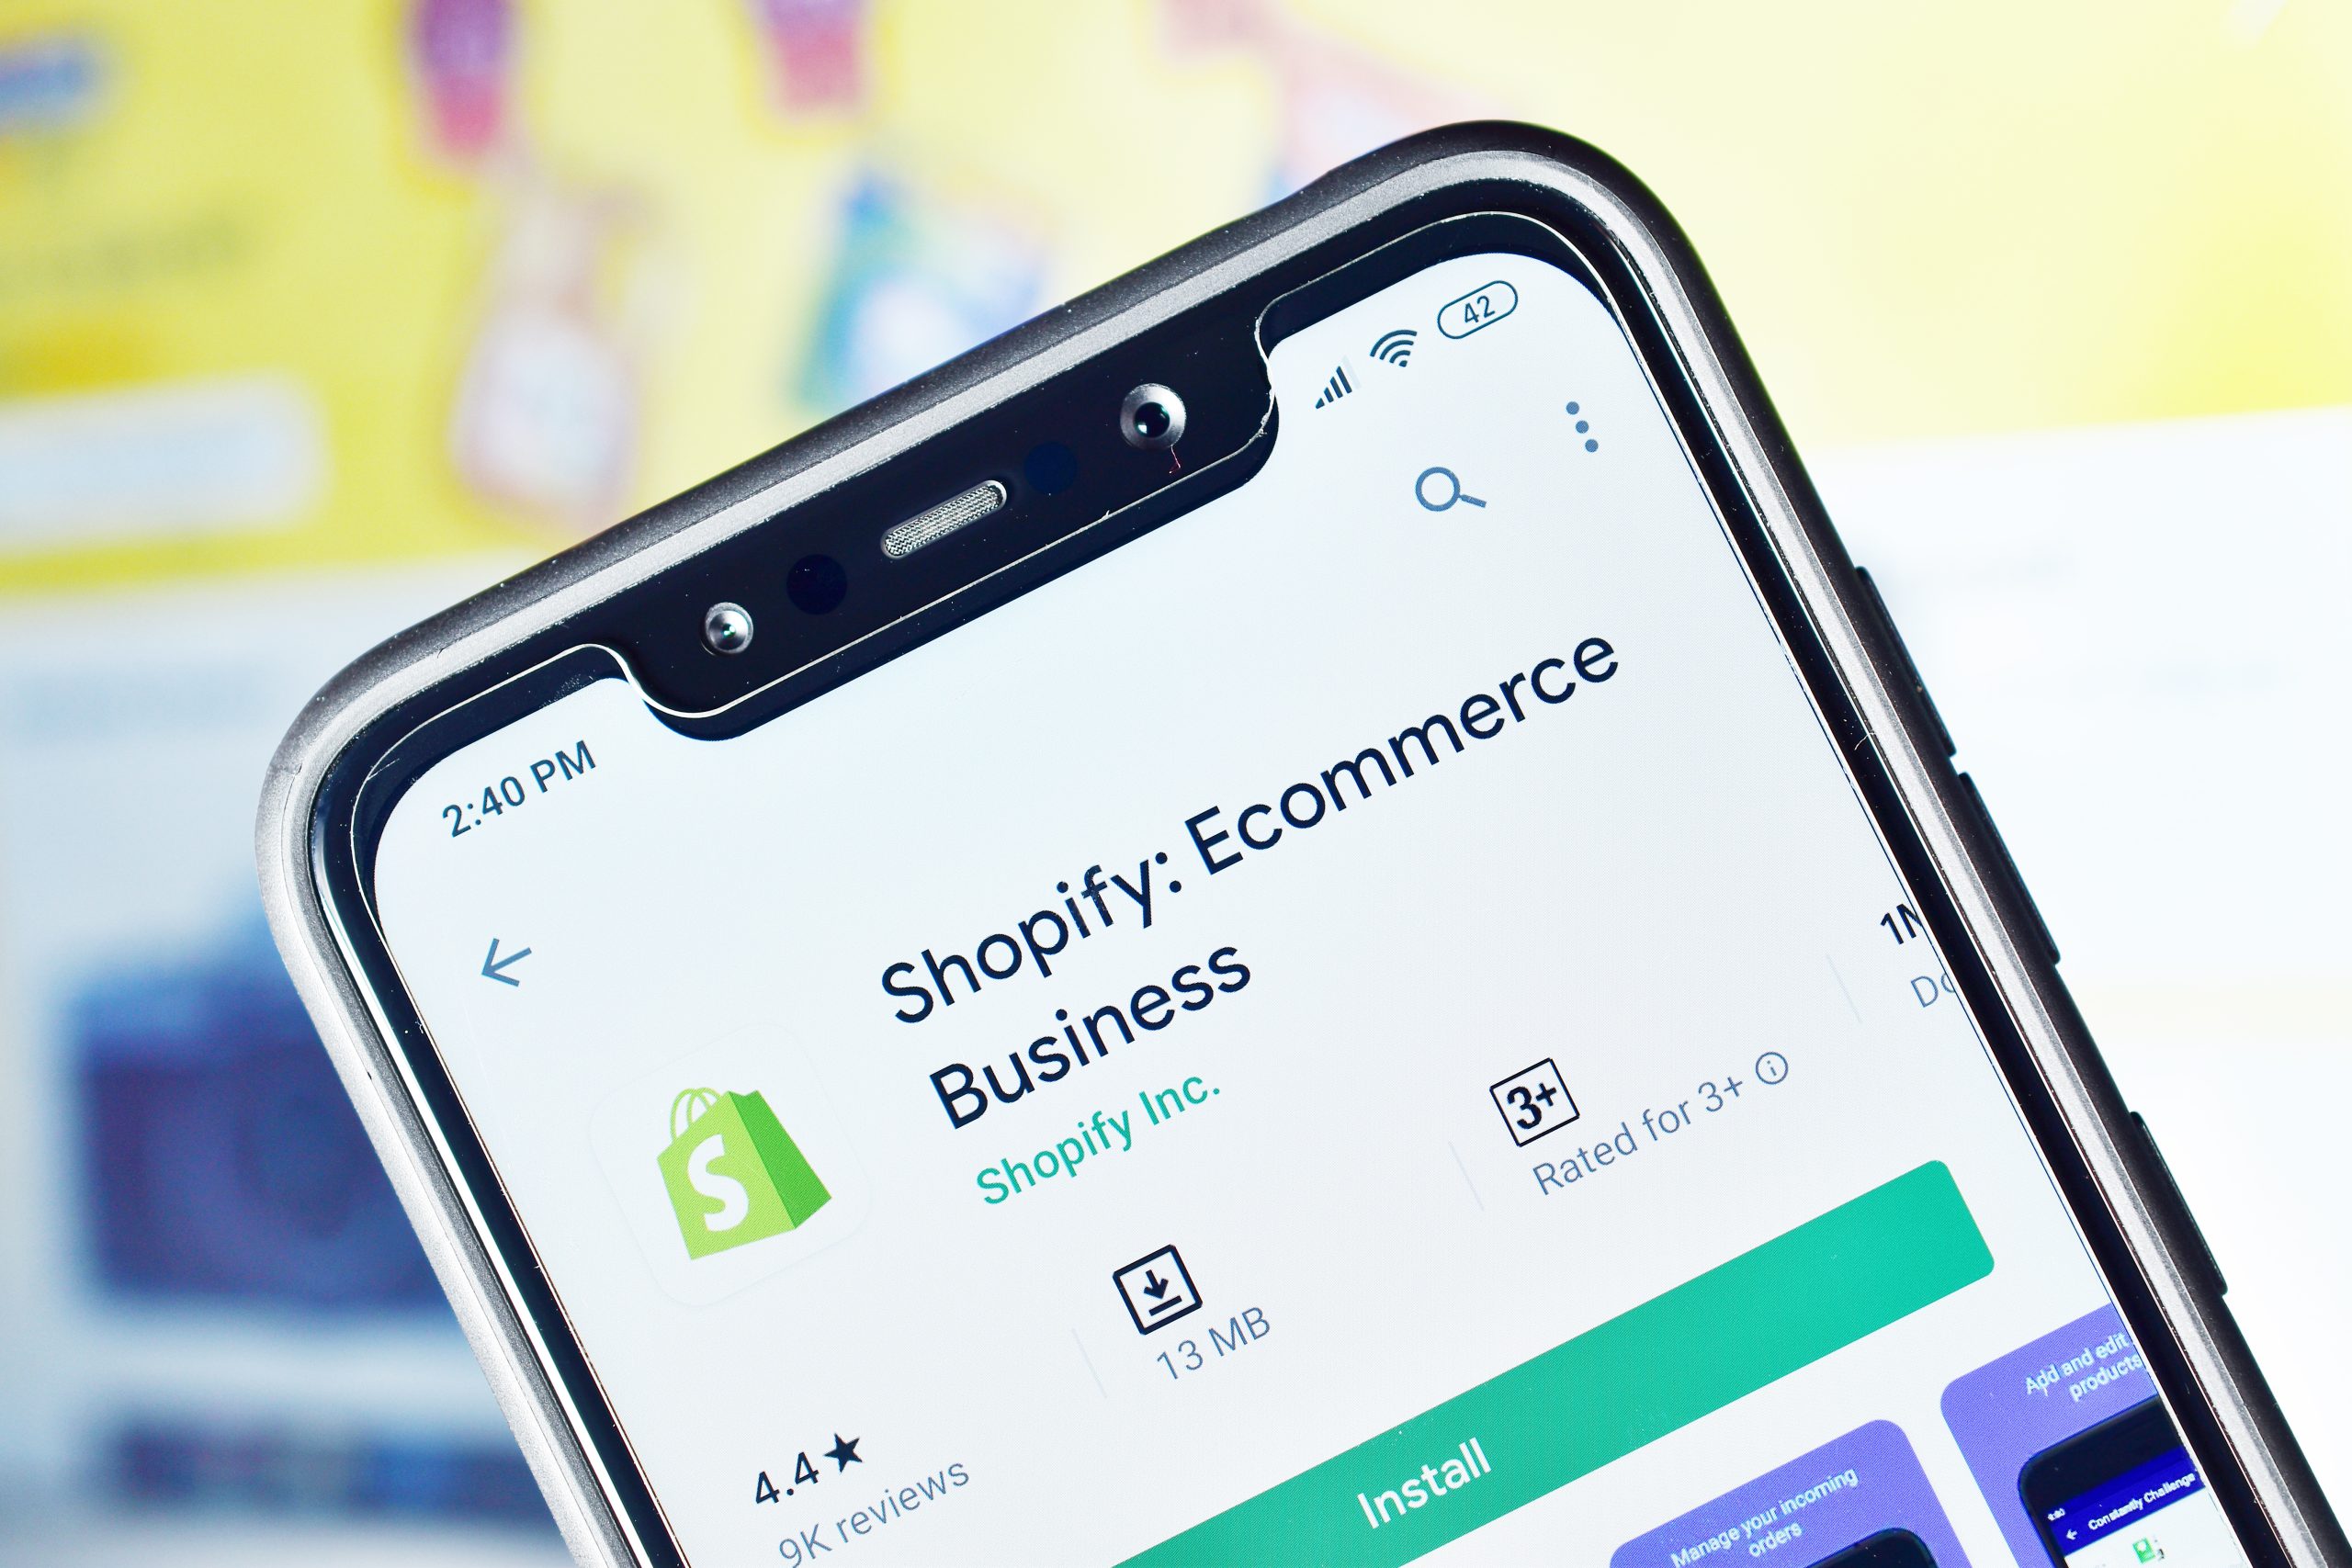 best seo practices for shopify and ecommerce